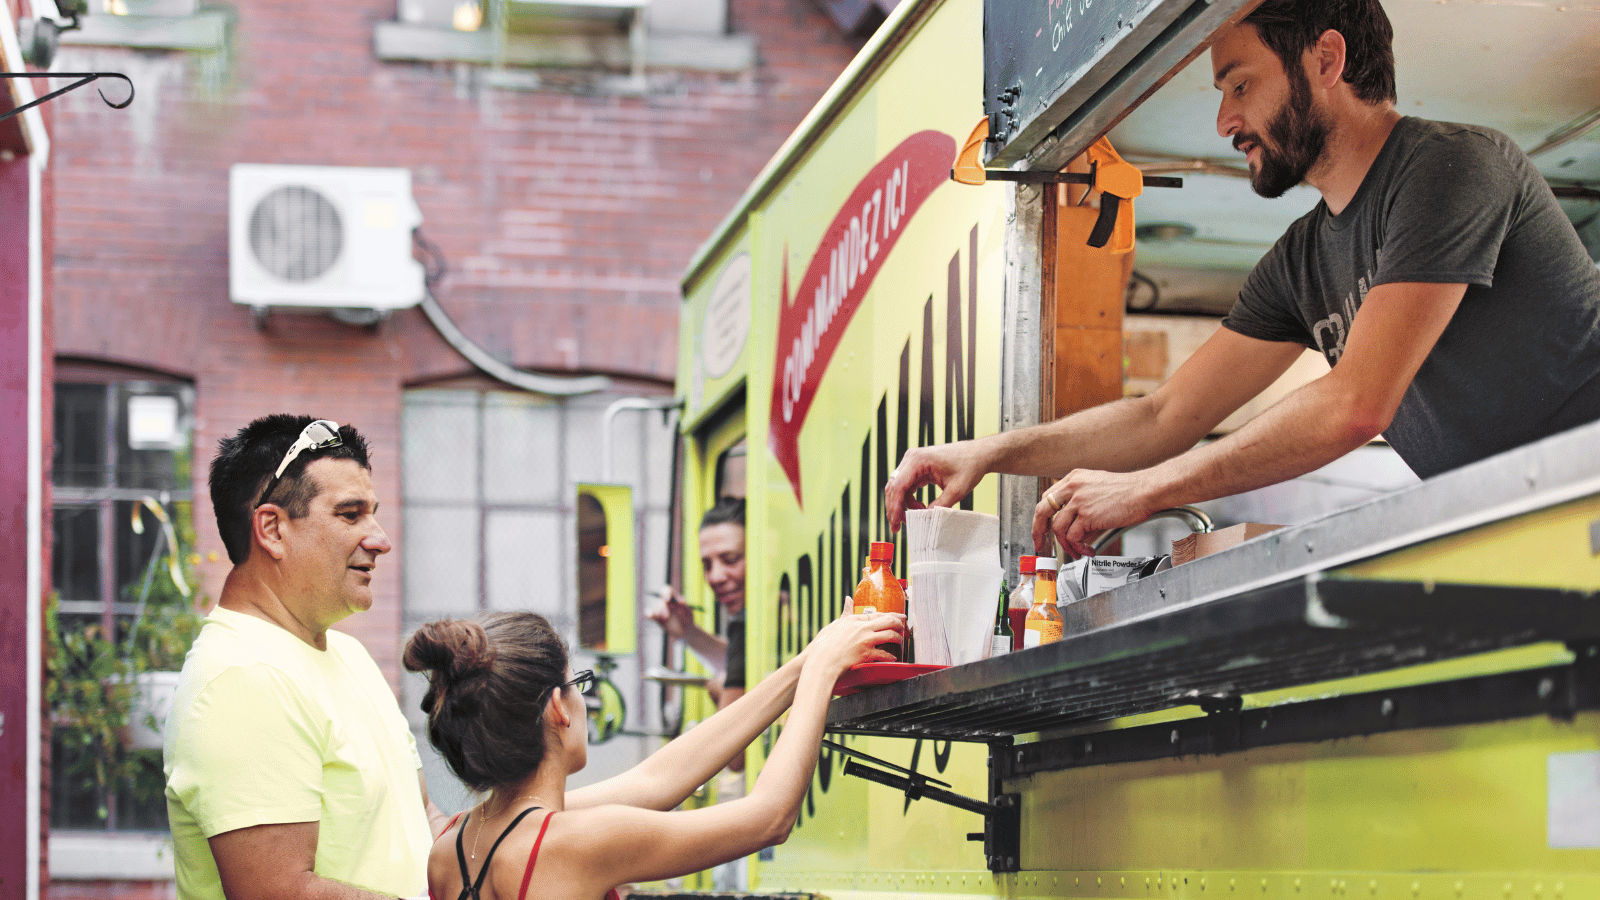 Man with dark hair and beard leans out of yellow food truck to hand woman in red top something. 